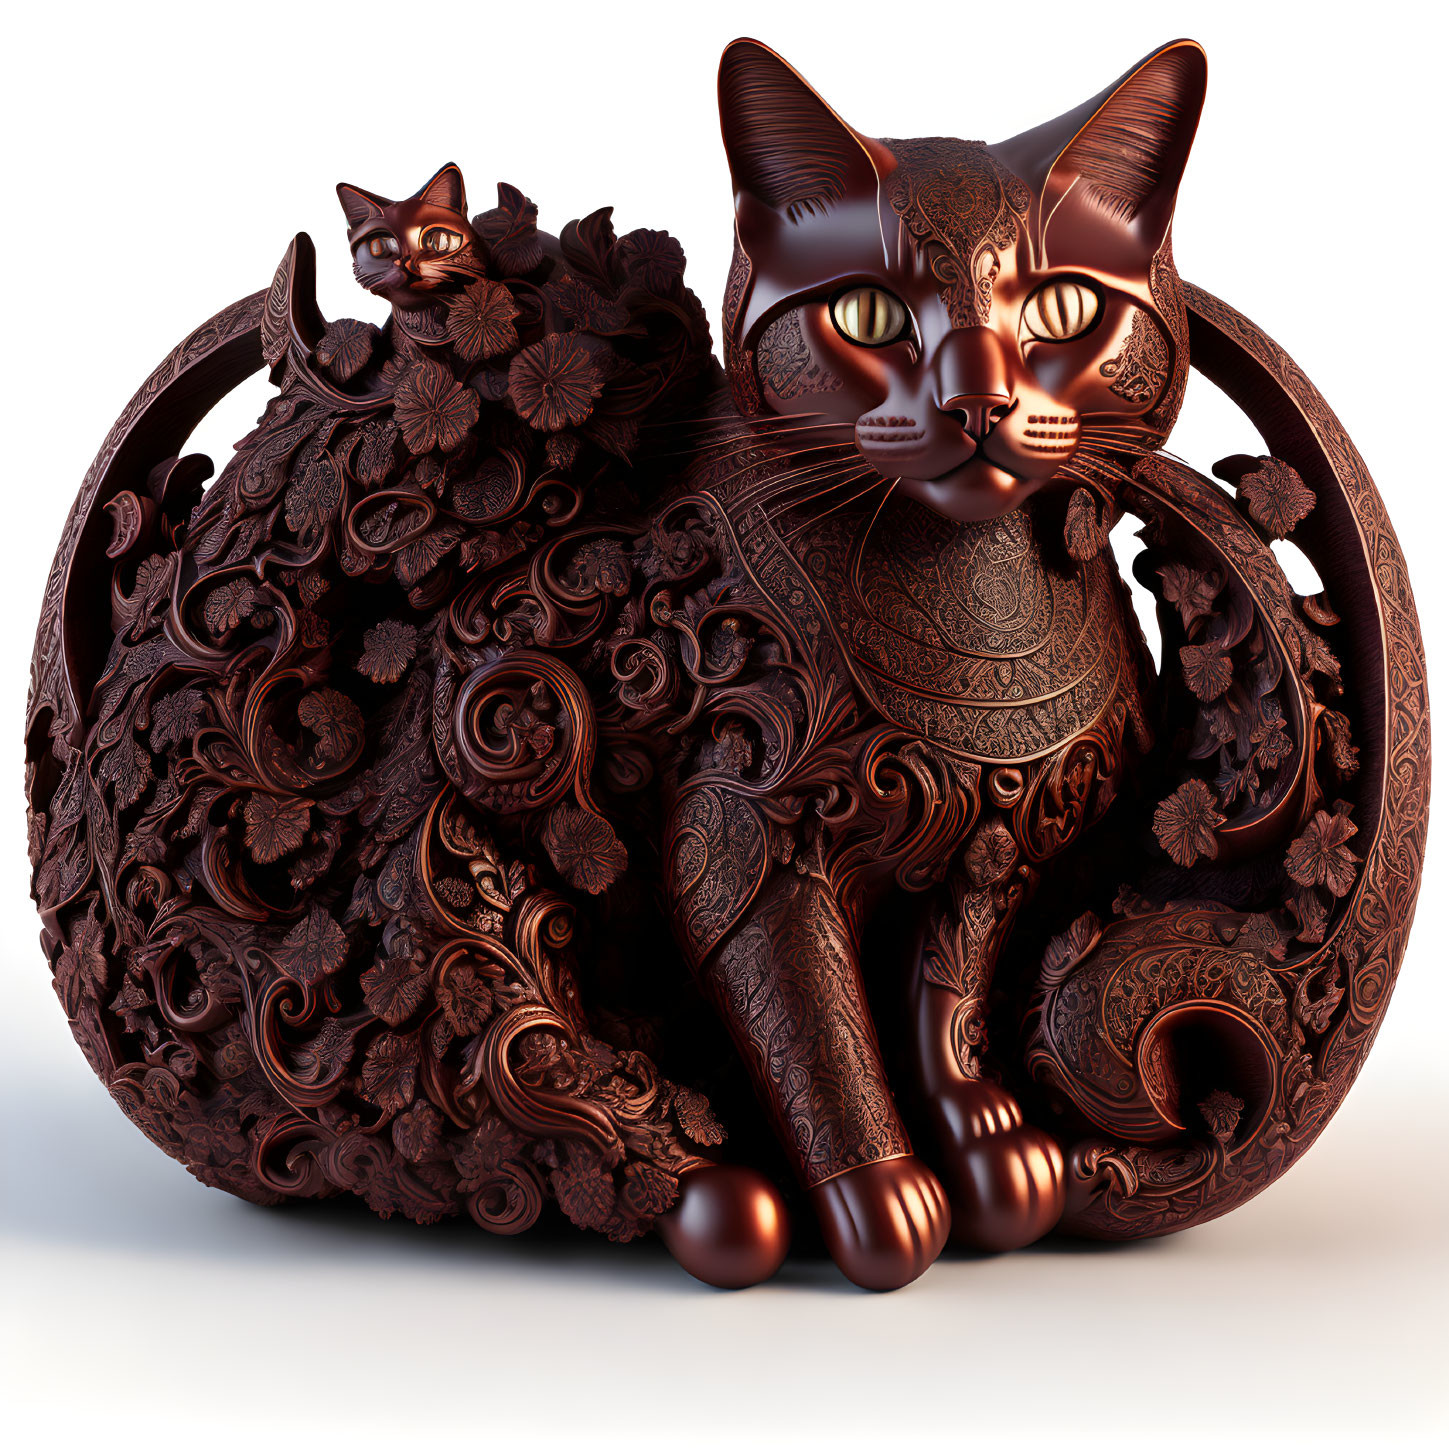 Ornate 3D-rendered cats with floral patterns in rich brown hue